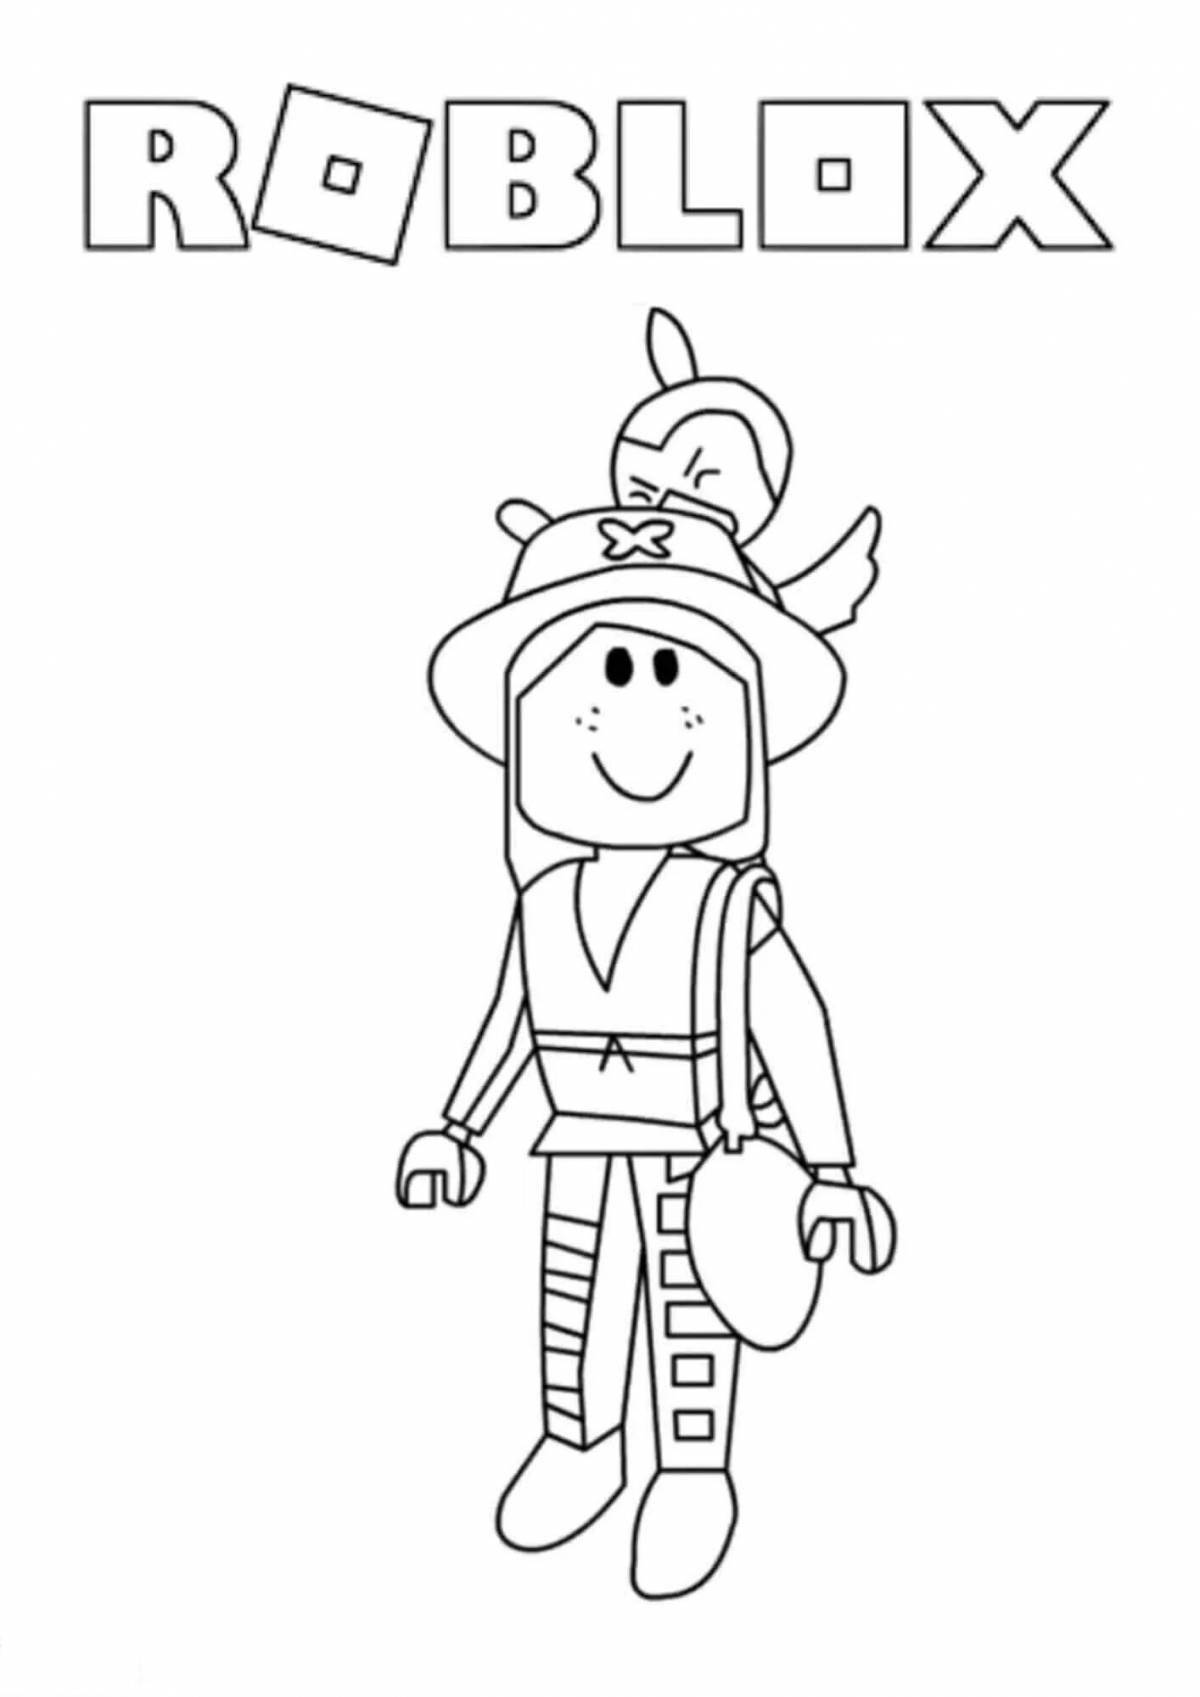 Roblox live avatar coloring book